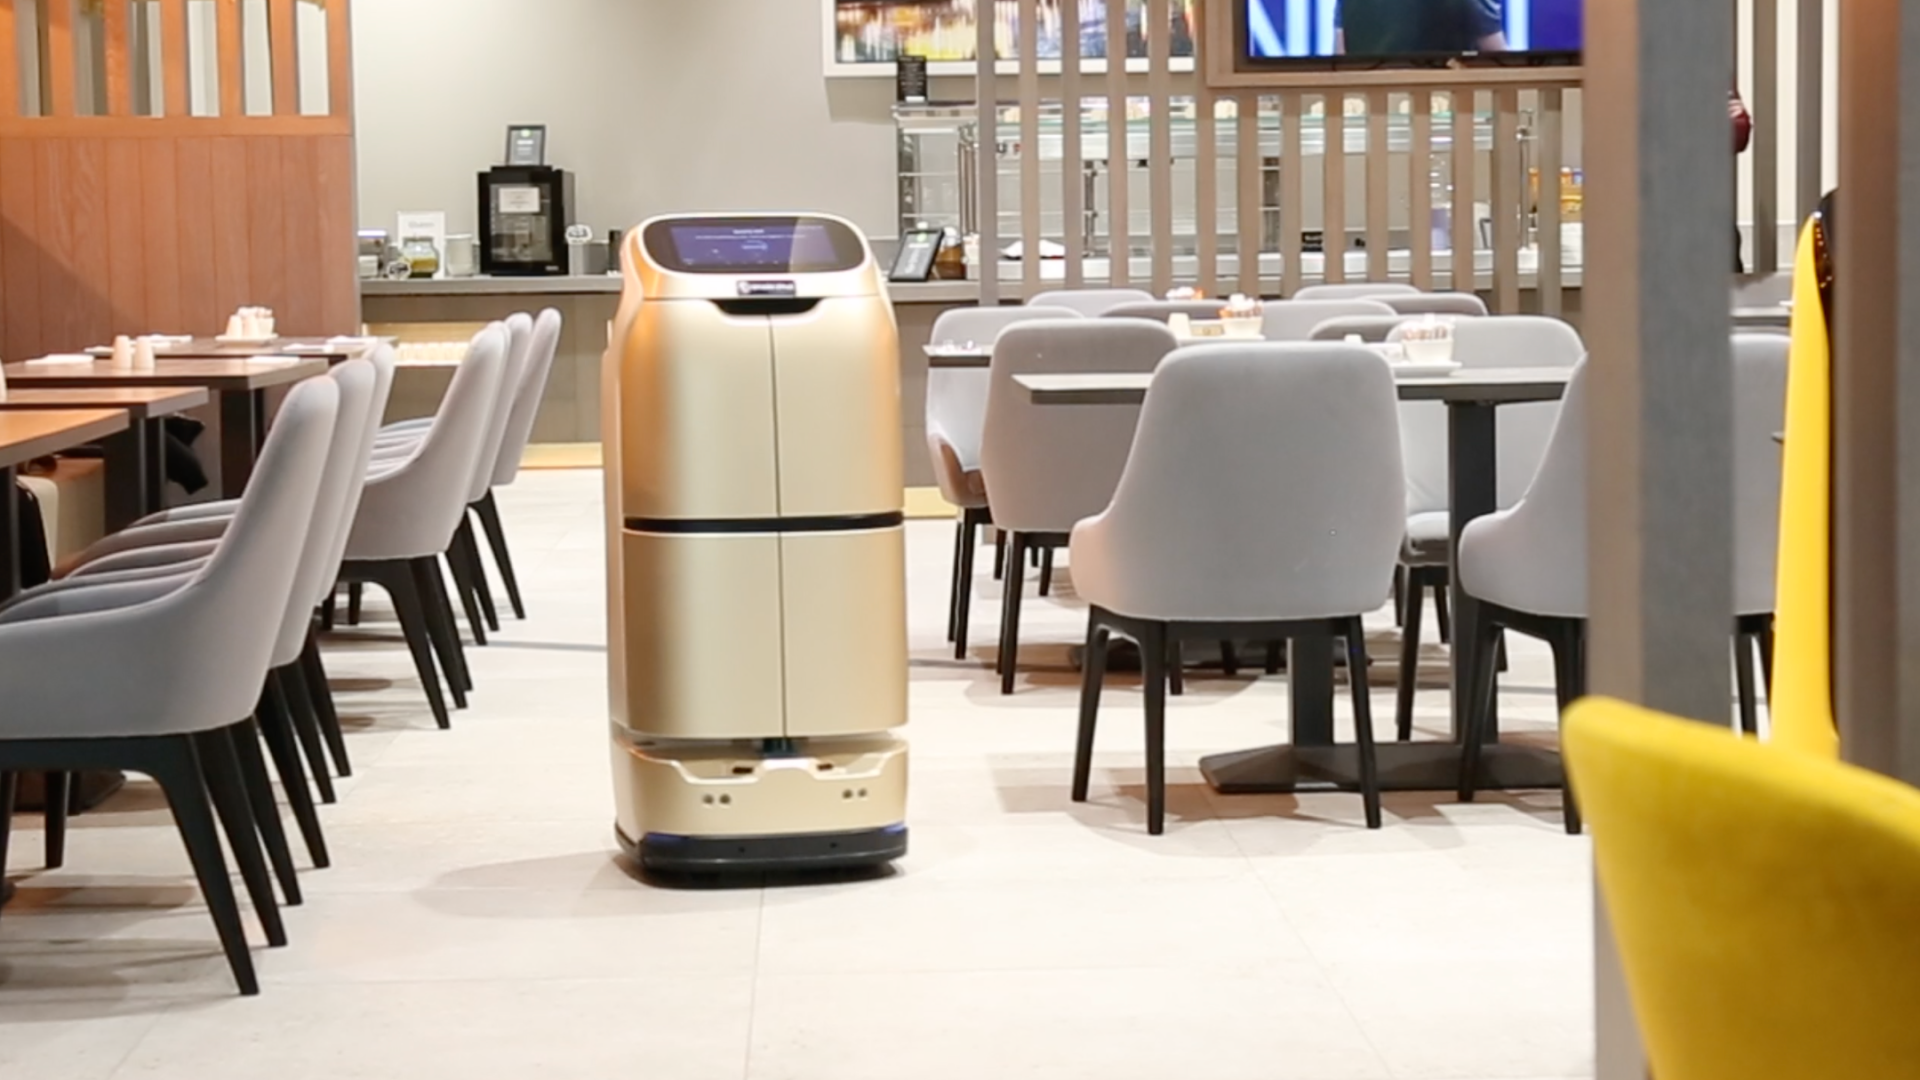 Image of ButlerBot in a hotel